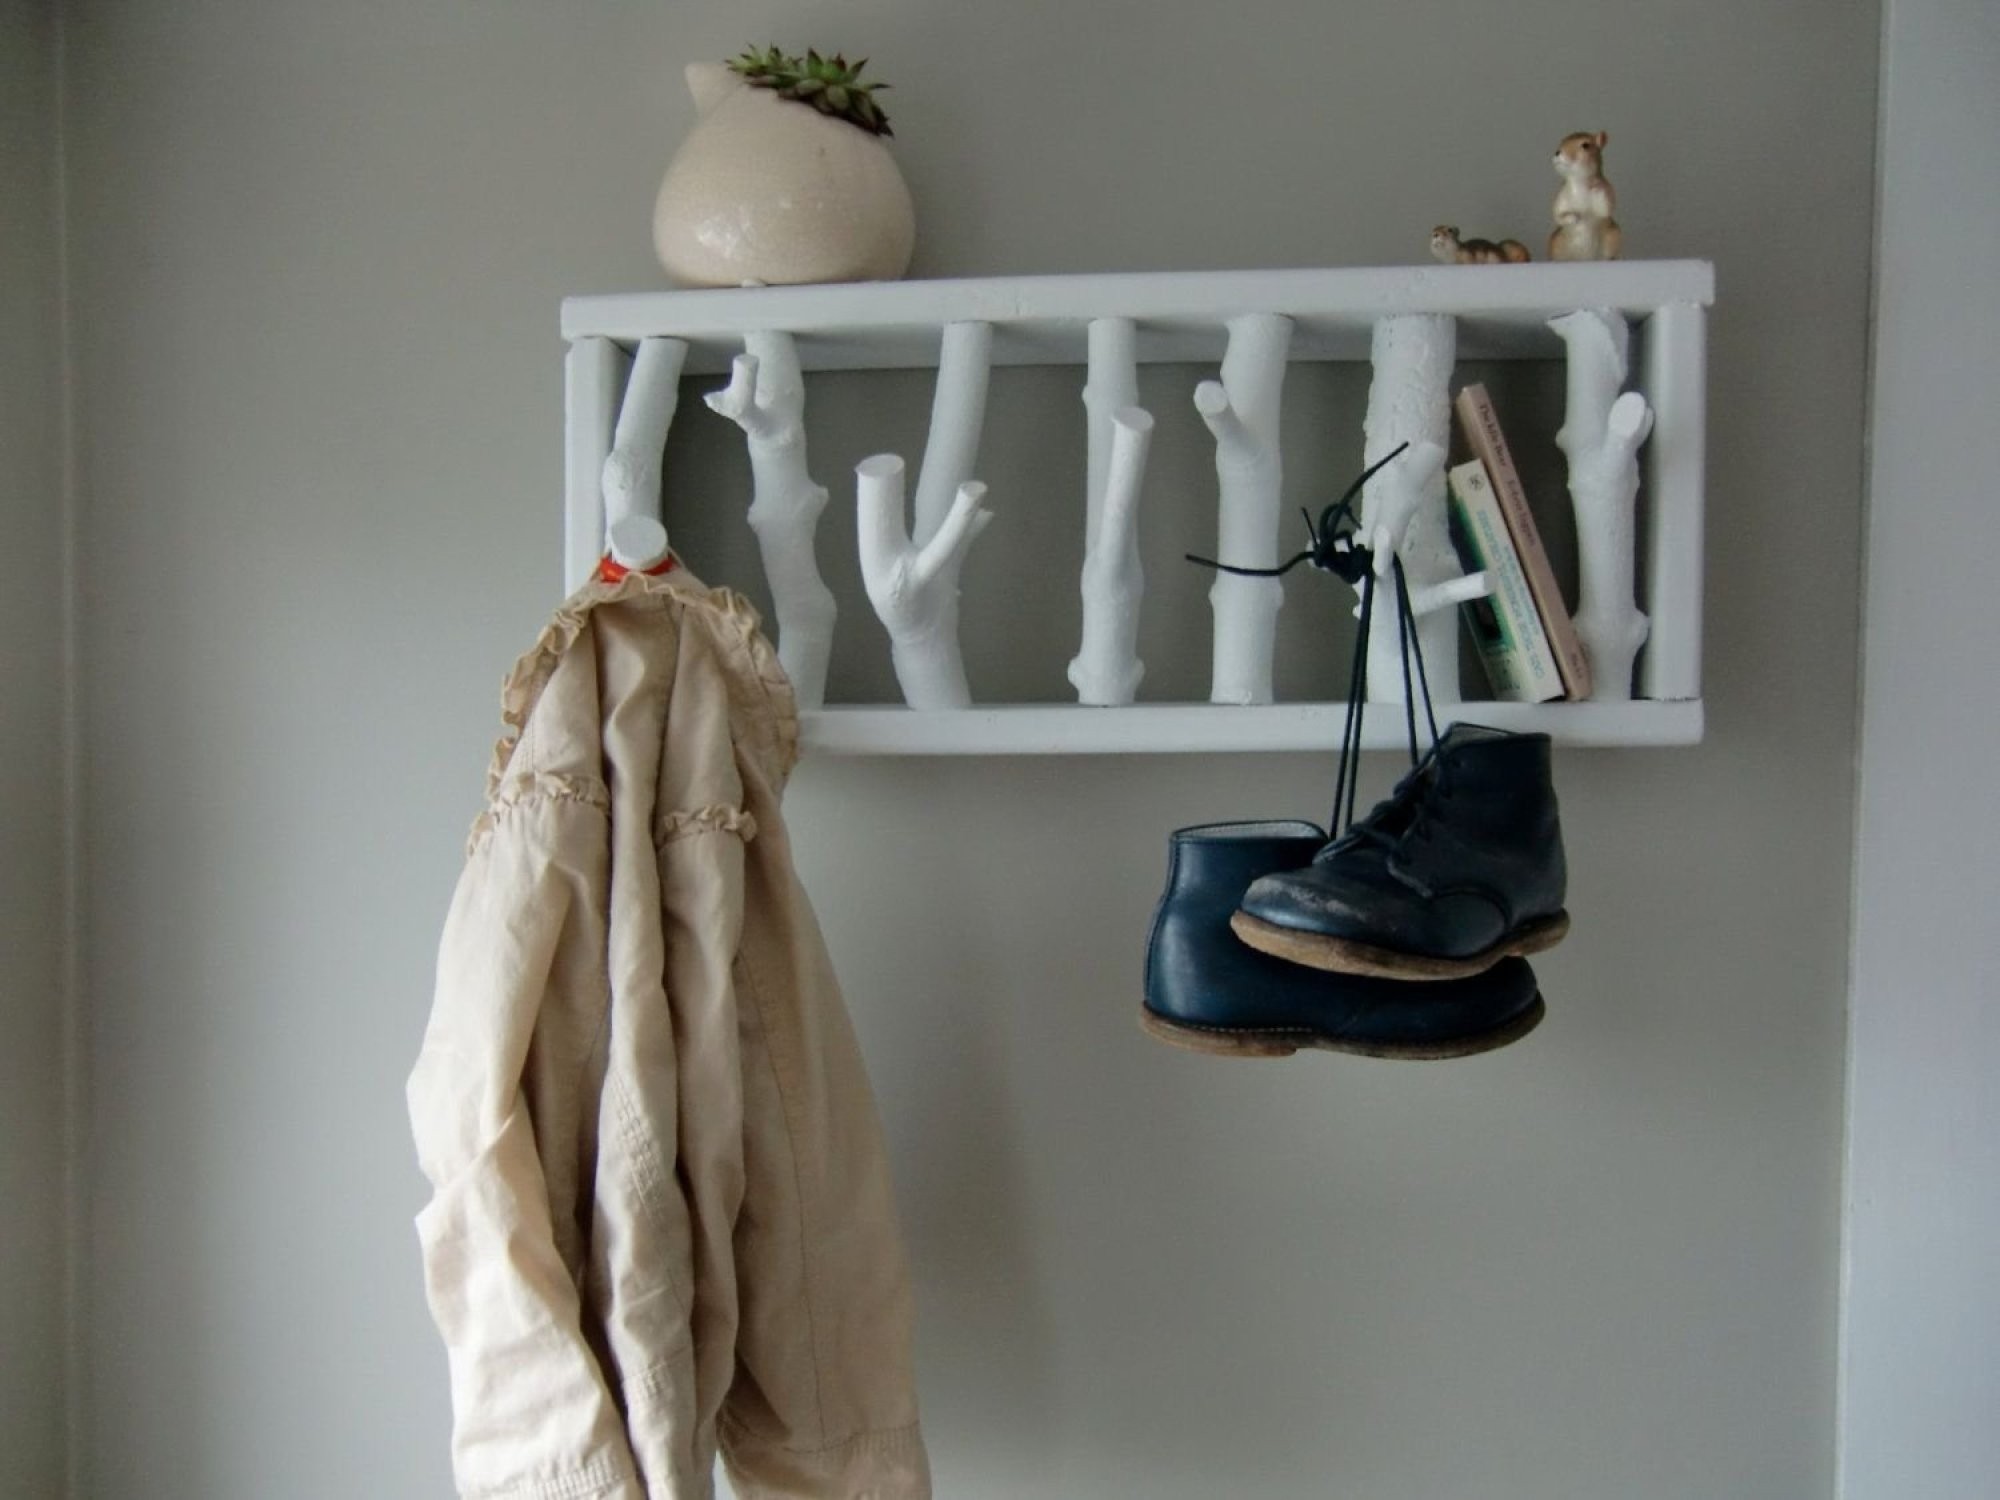 Decoration ideas creative white brances for rustic coat hooks wall